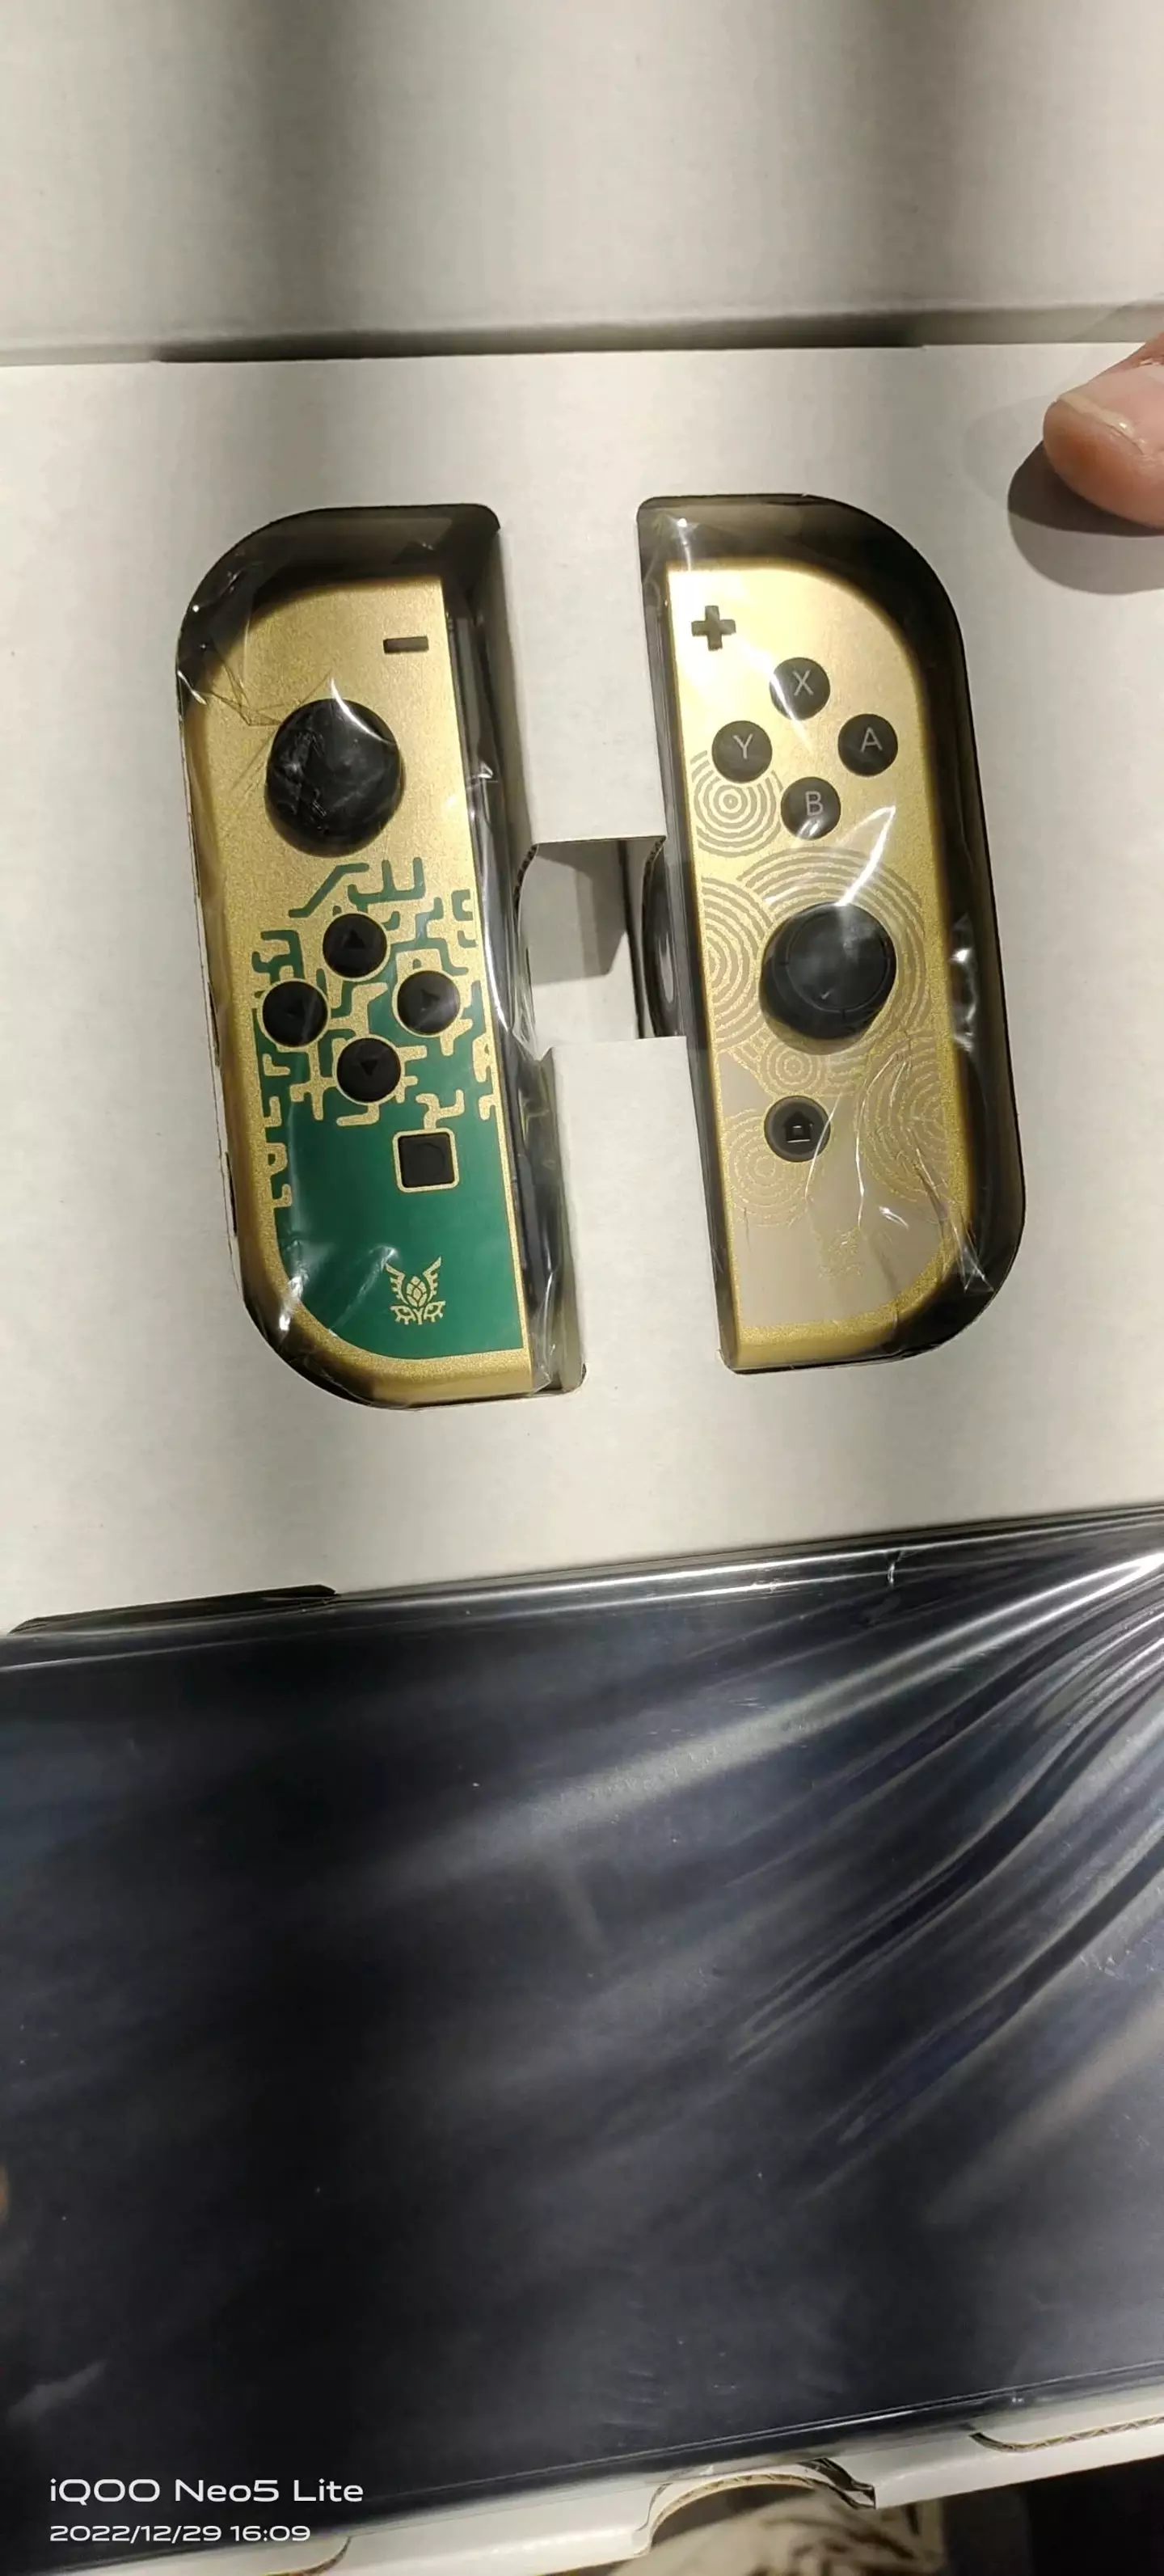 The supposed new Tears of the Kingdom Switch model /